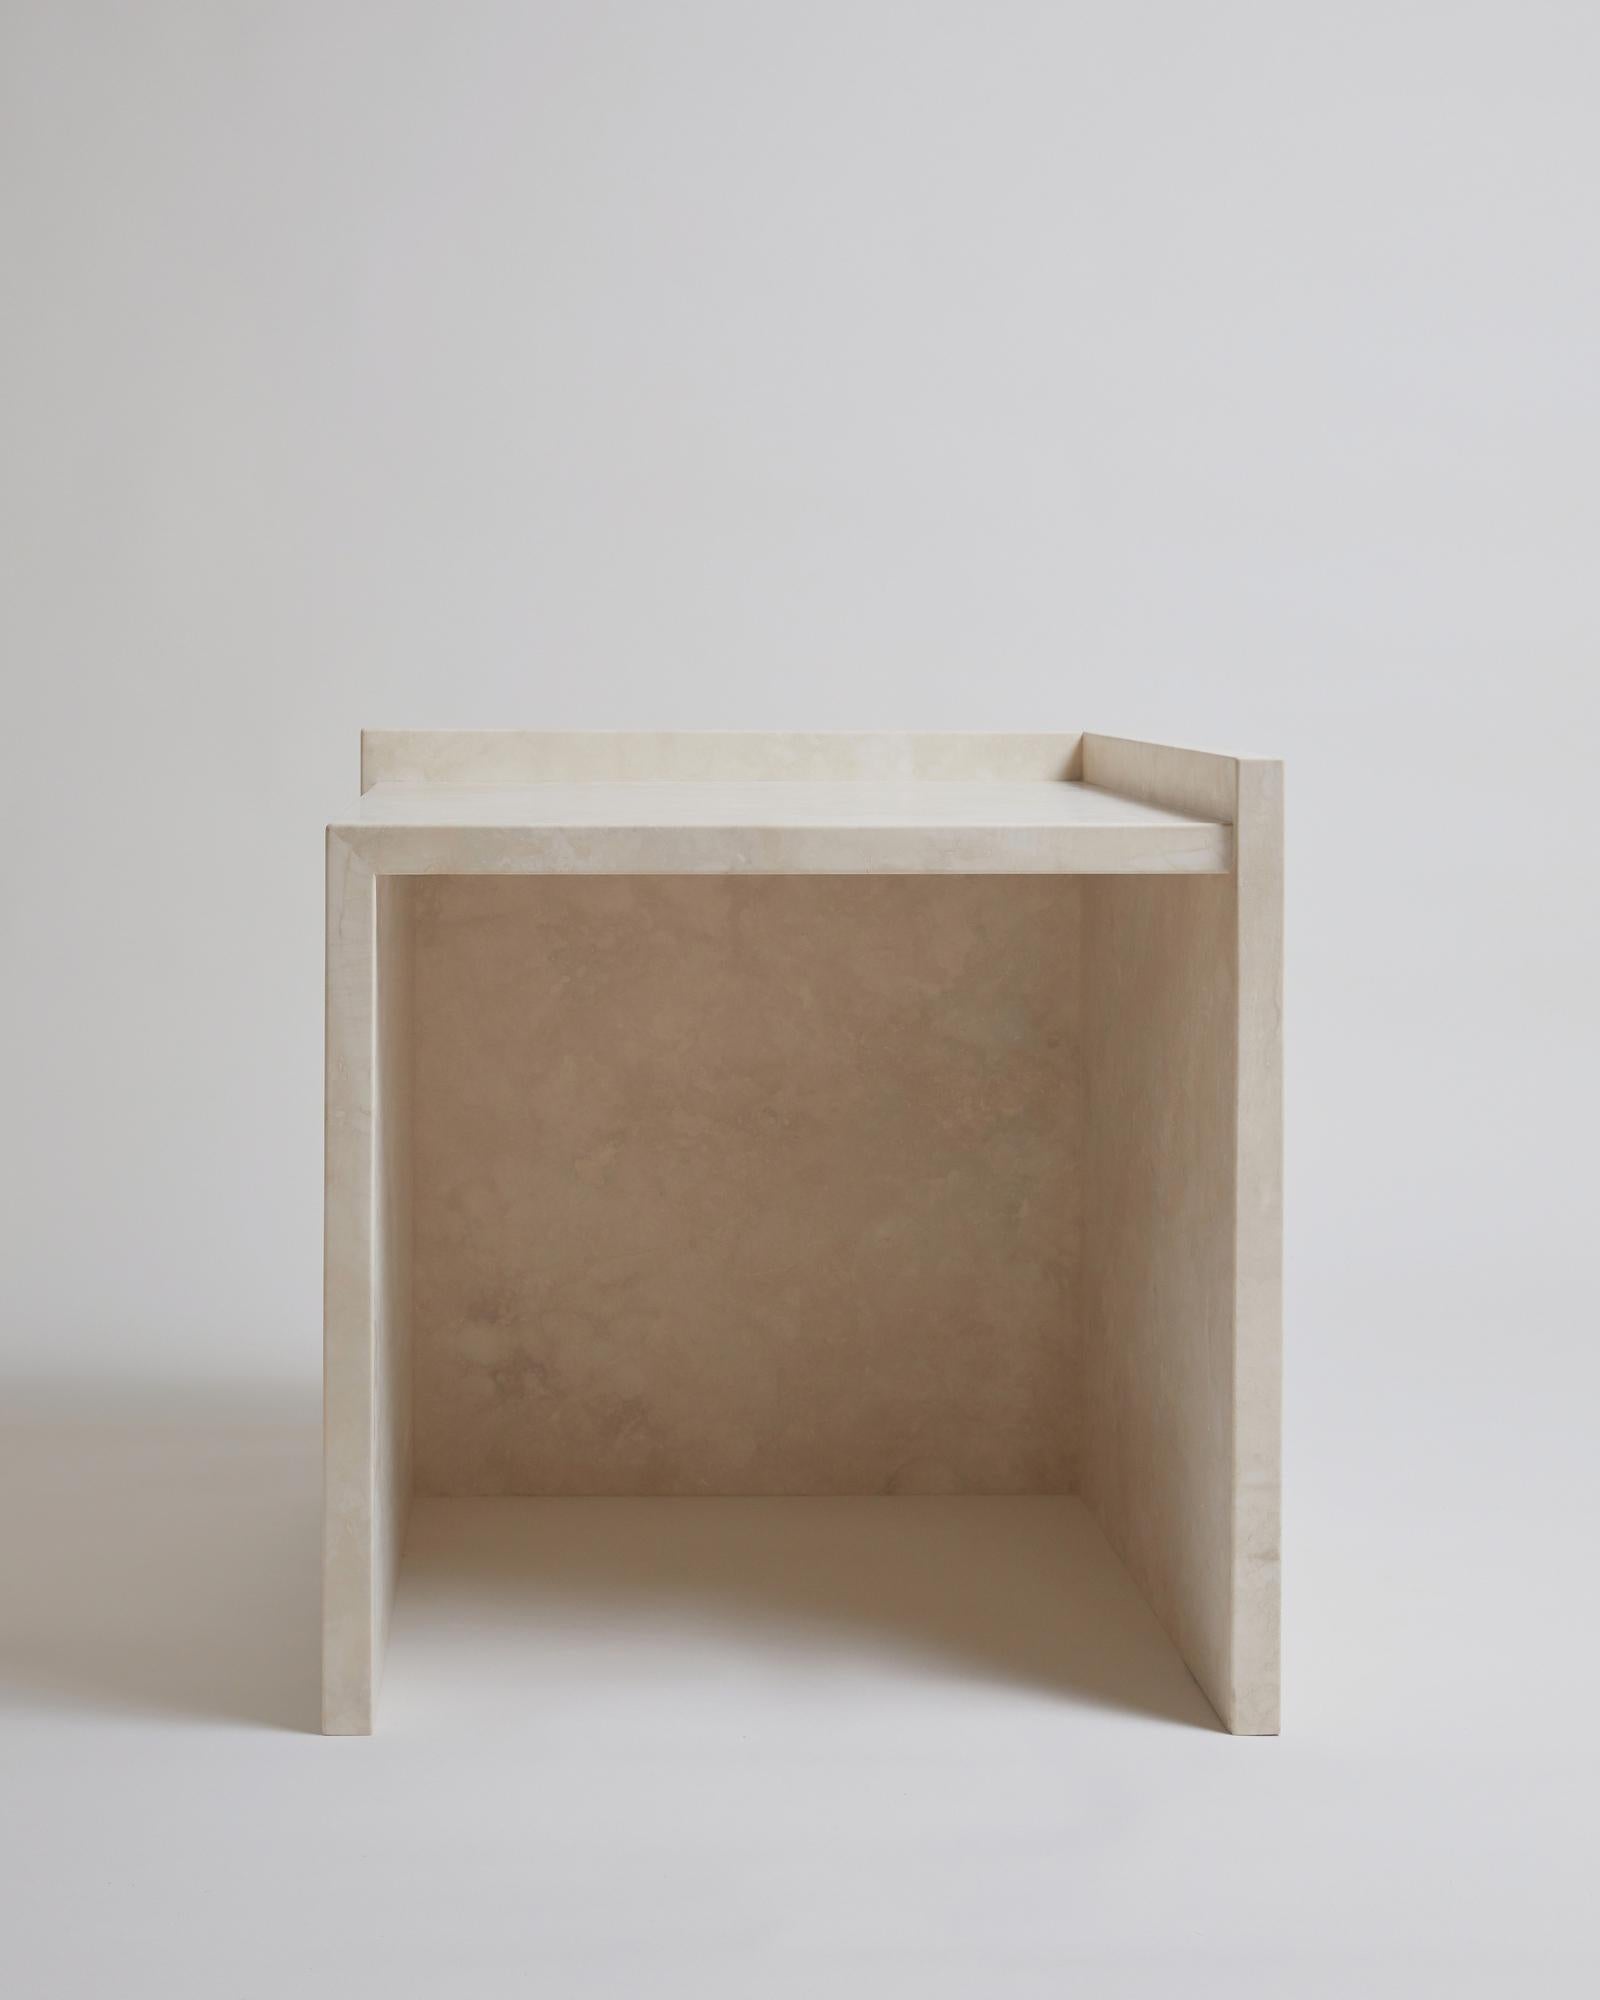 The AA112.2 side table, part of the 'Pure Minimalist' collection by Amee Allsop, is a simple yet architectural design with a focus on the material and form. It is elegantly constructed of 3cm solid ivory travertine that is filled, honed and